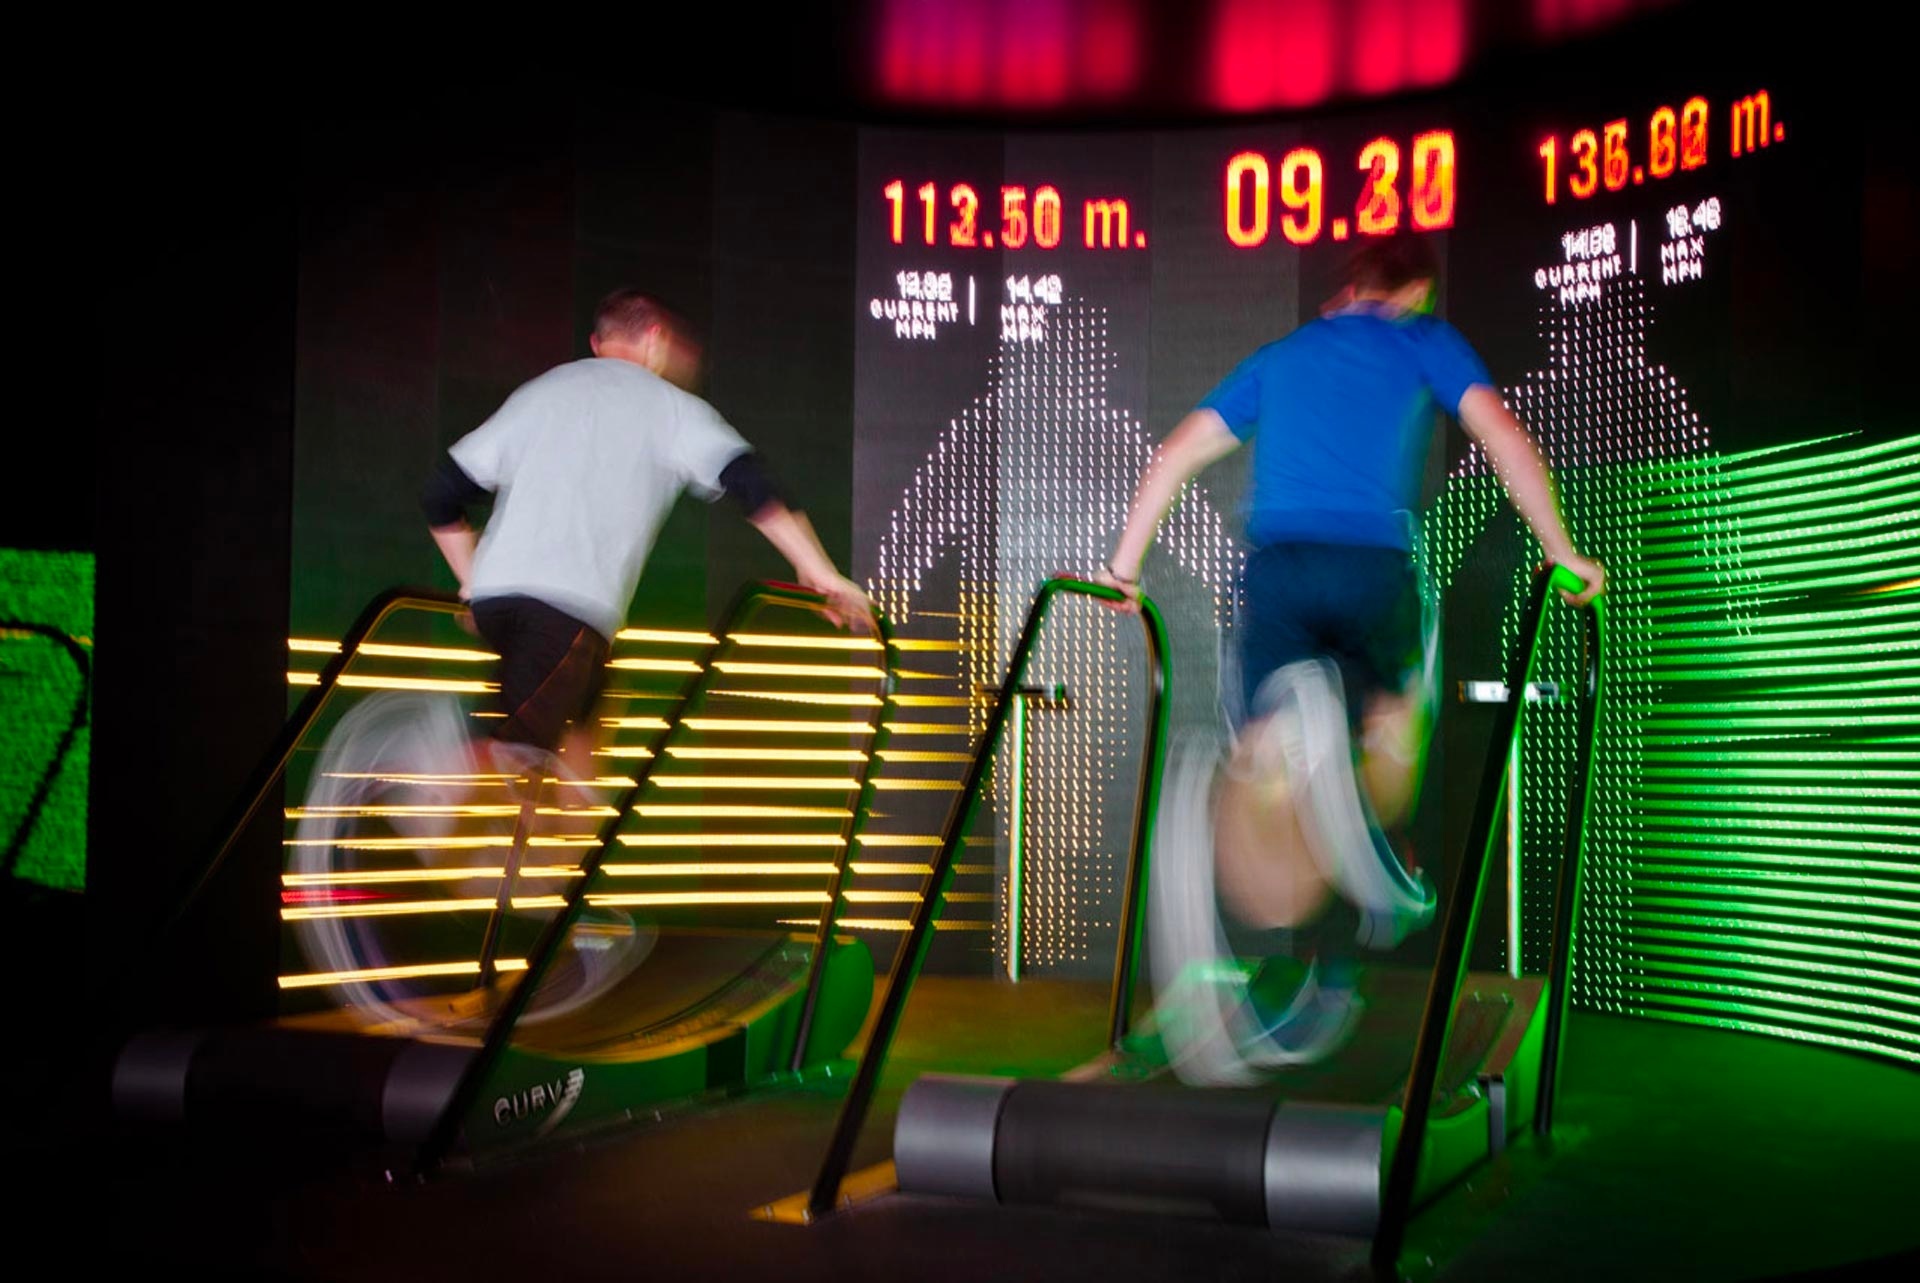 Two participating runners on treadmills, competing for the furthest distance